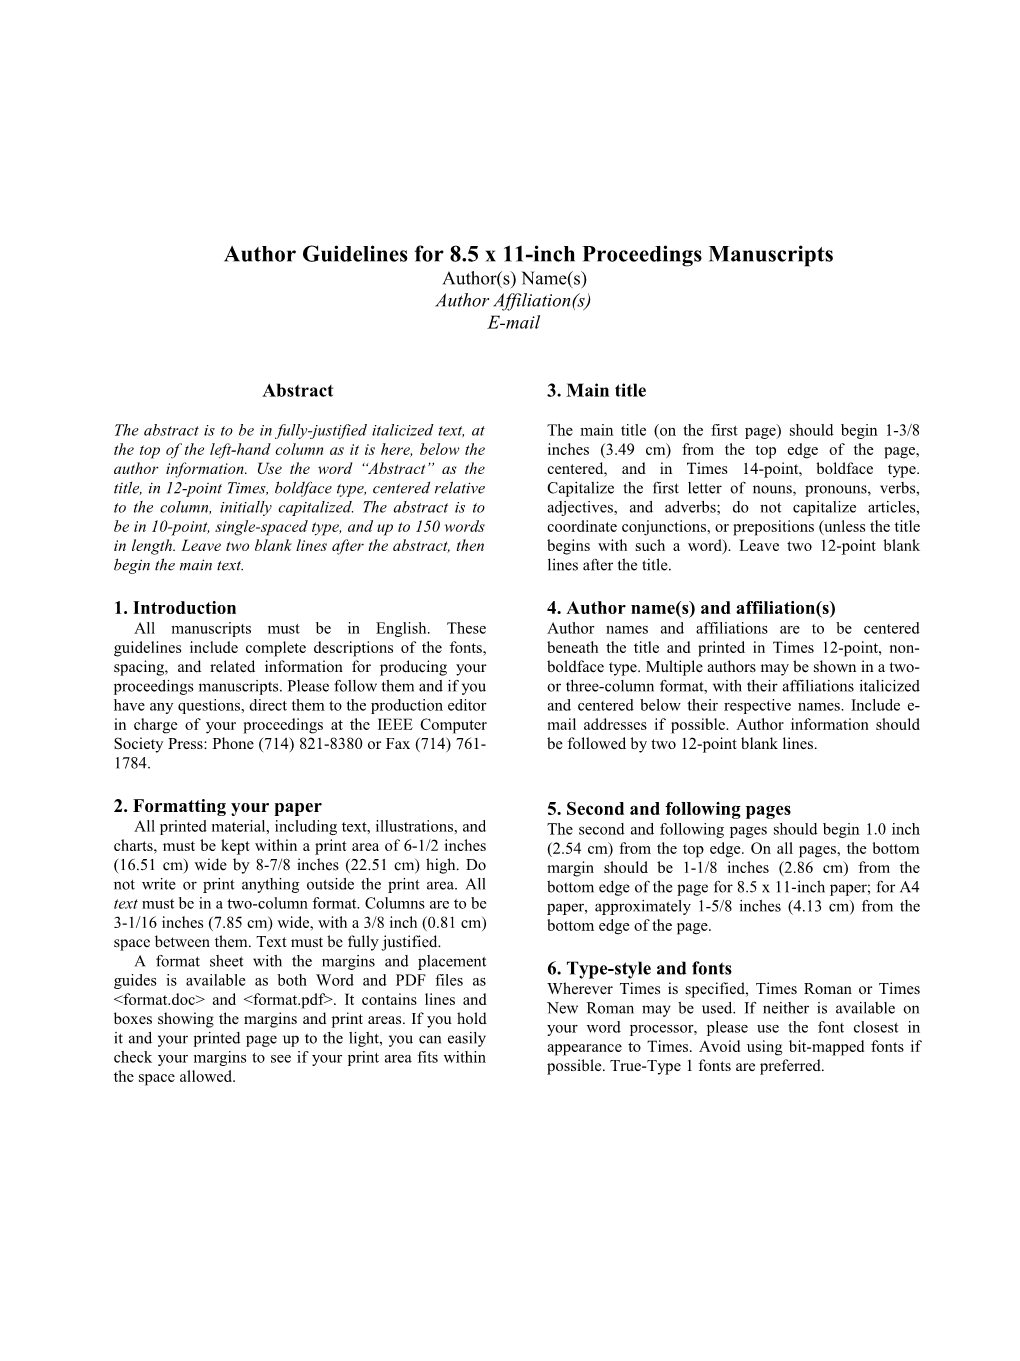 Author Guidelines for 8.5 X 11-Inch Proceedings Manuscripts